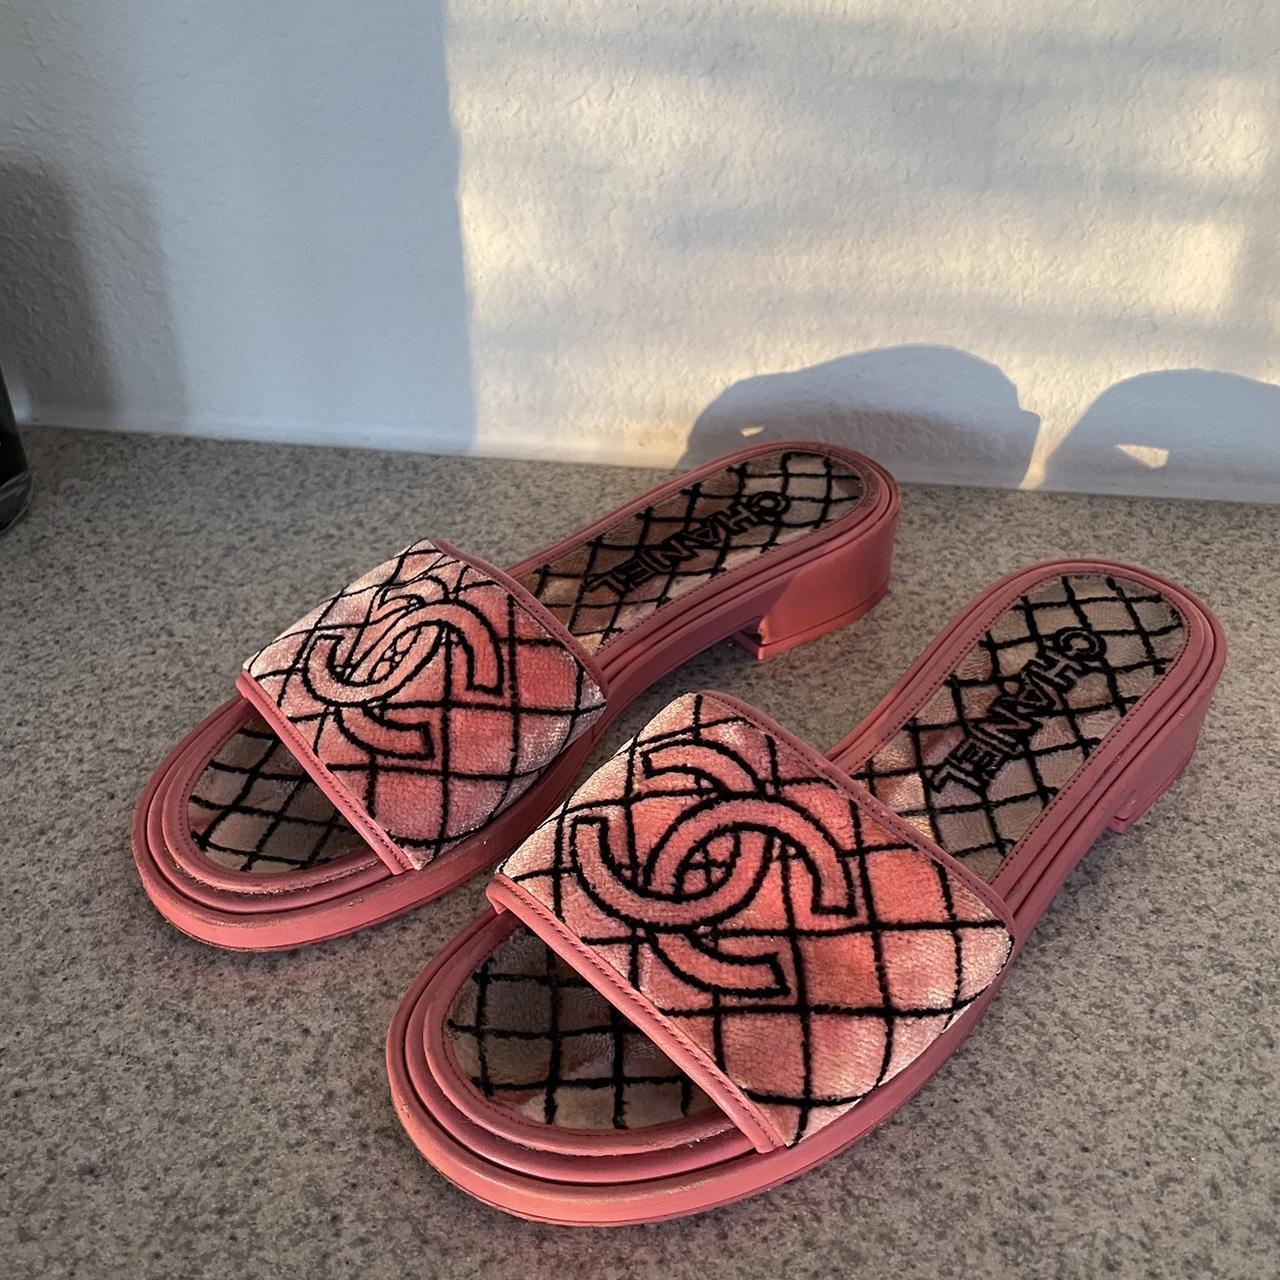 Authentic Chanel slides , Lost authenticy paper while